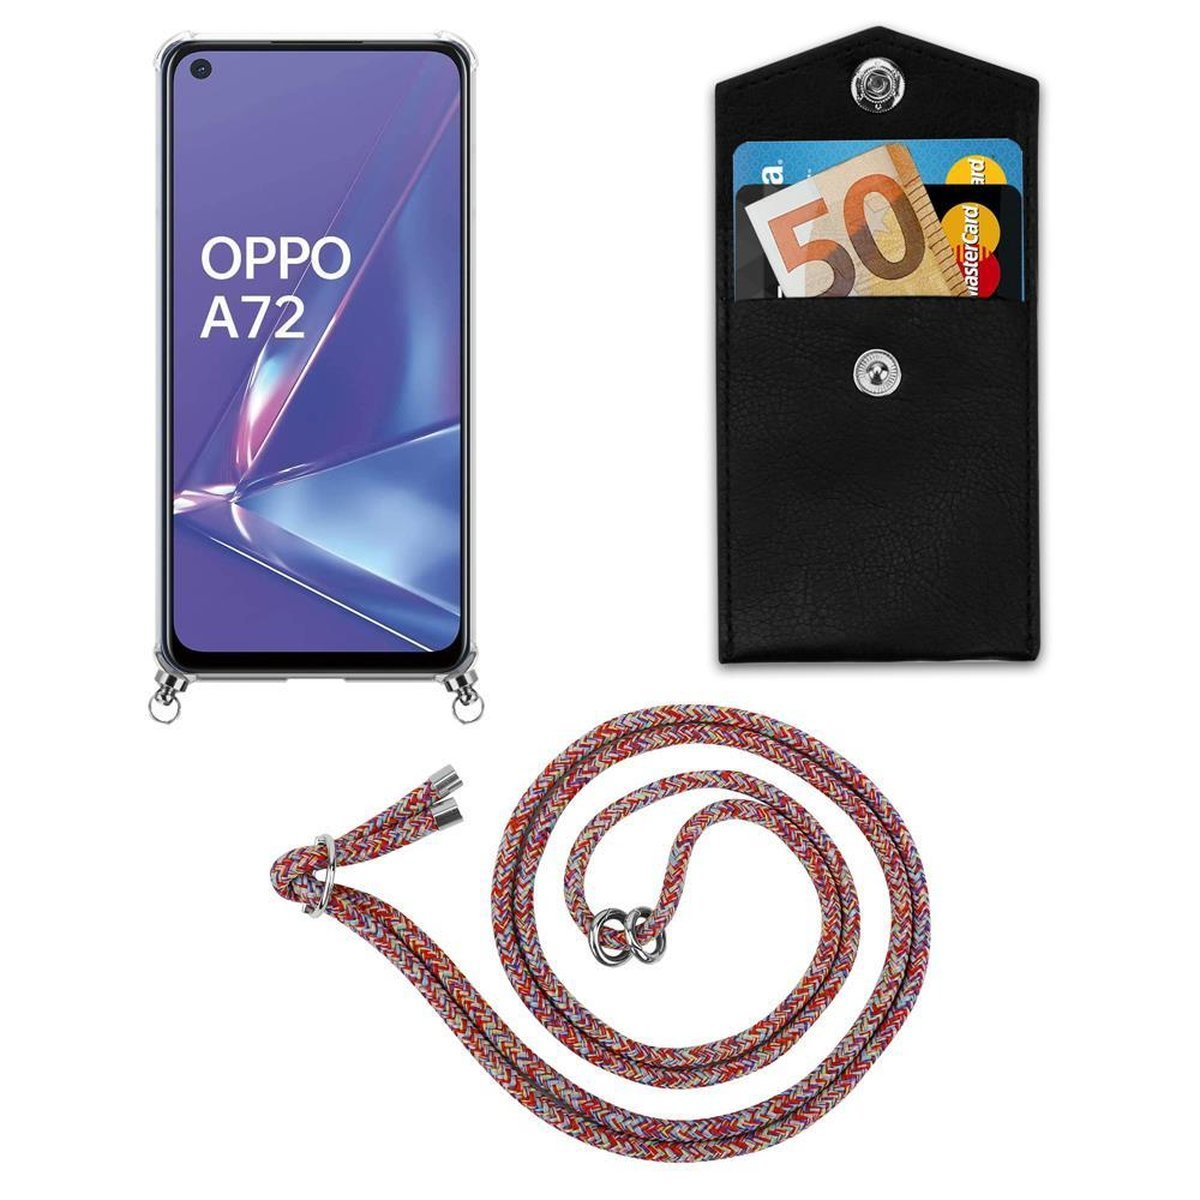 CADORABO Handy Kette COLORFUL Silber Backcover, Hülle, mit abnehmbarer A92, PARROT und Ringen, Band Oppo, Kordel